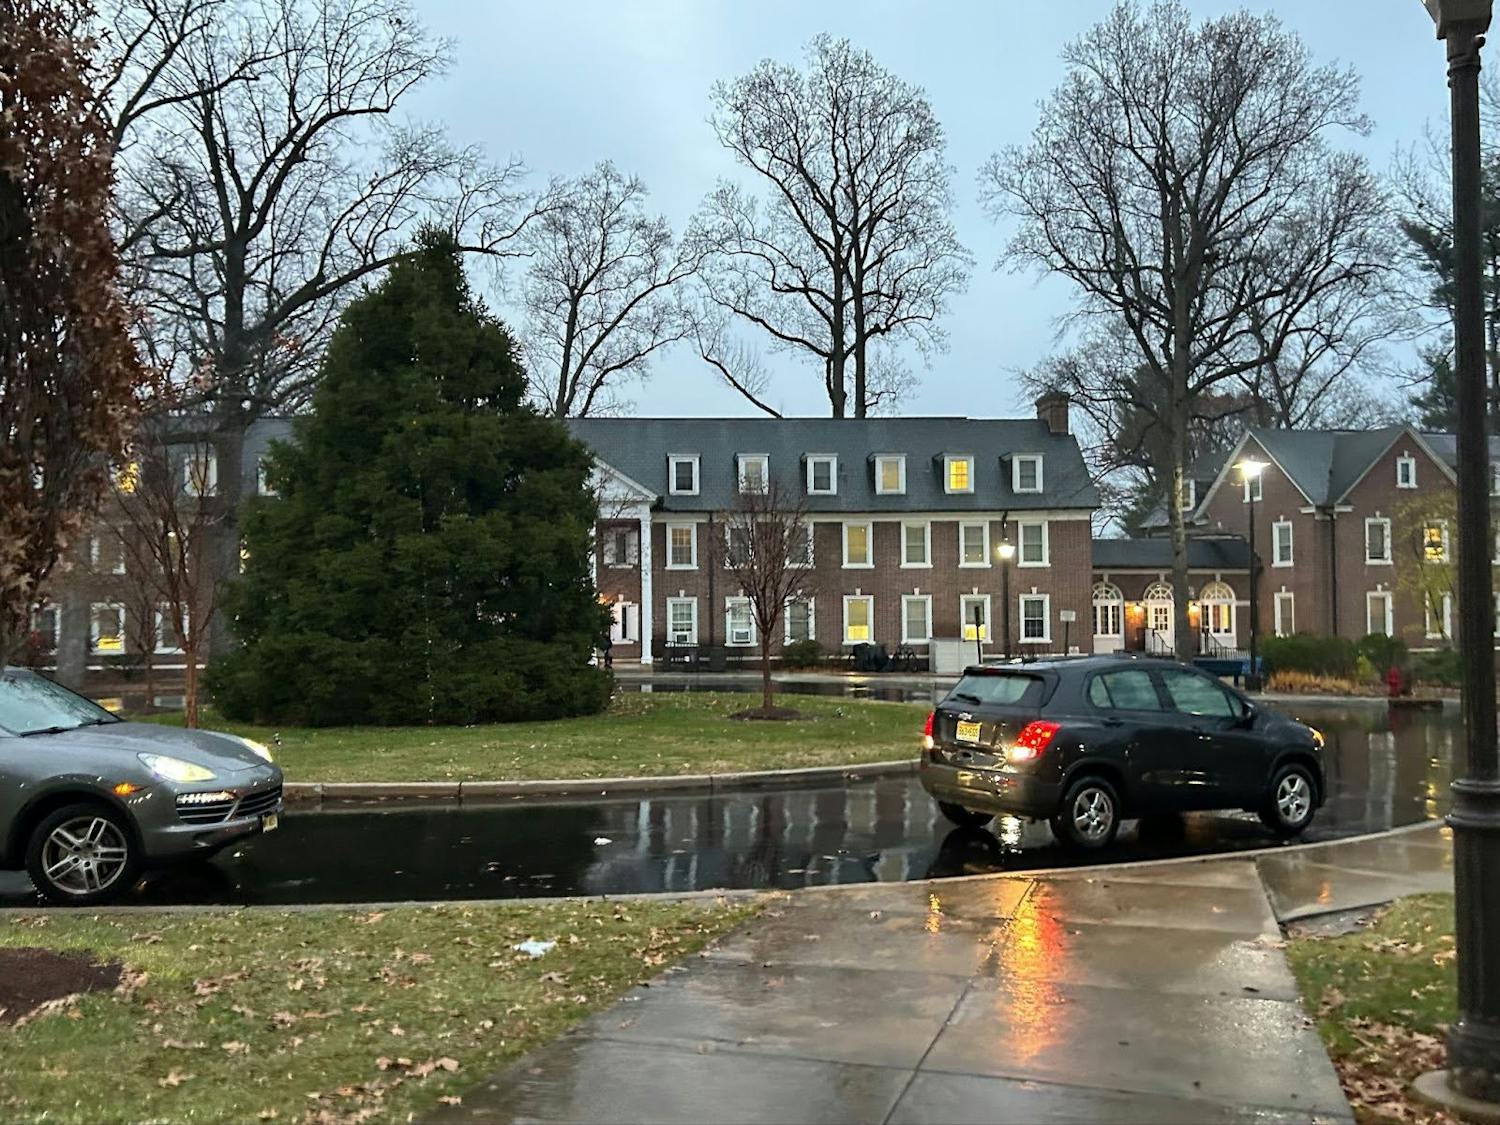 Cars located after Allen, Ely and Brewster Halls on Friday, Dec. 1. Many parents were seen picking up students for the weekend in order to take them home (Photo courtesy of Briana Keenan).